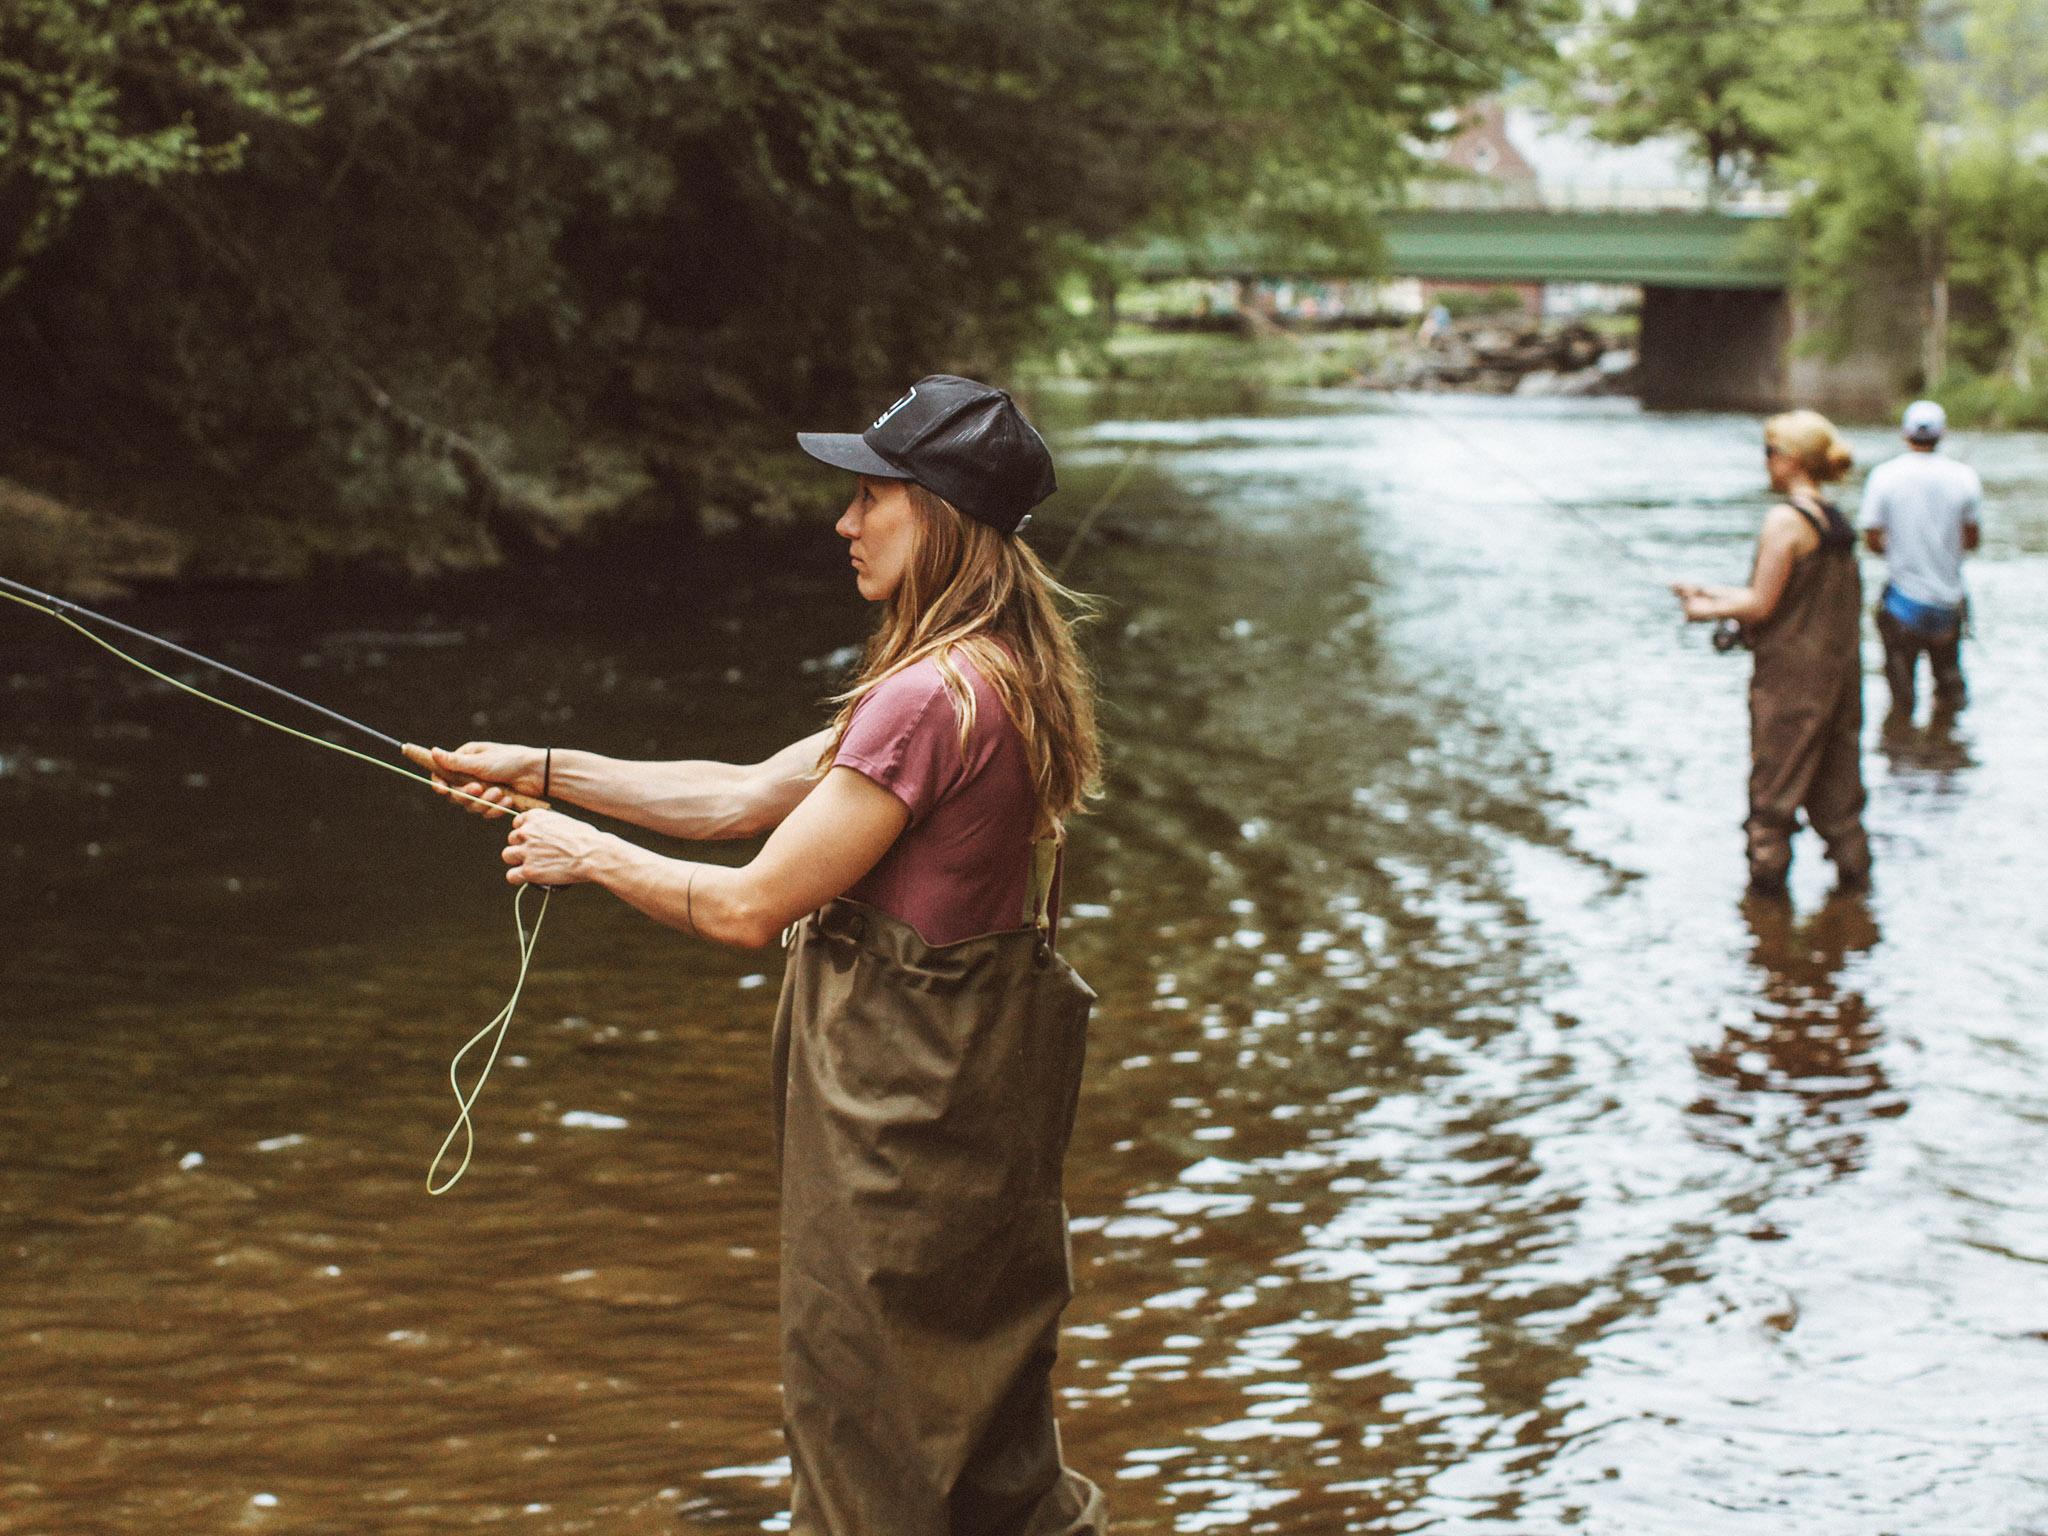 The millennials who are taking to the water to become fly-fishers